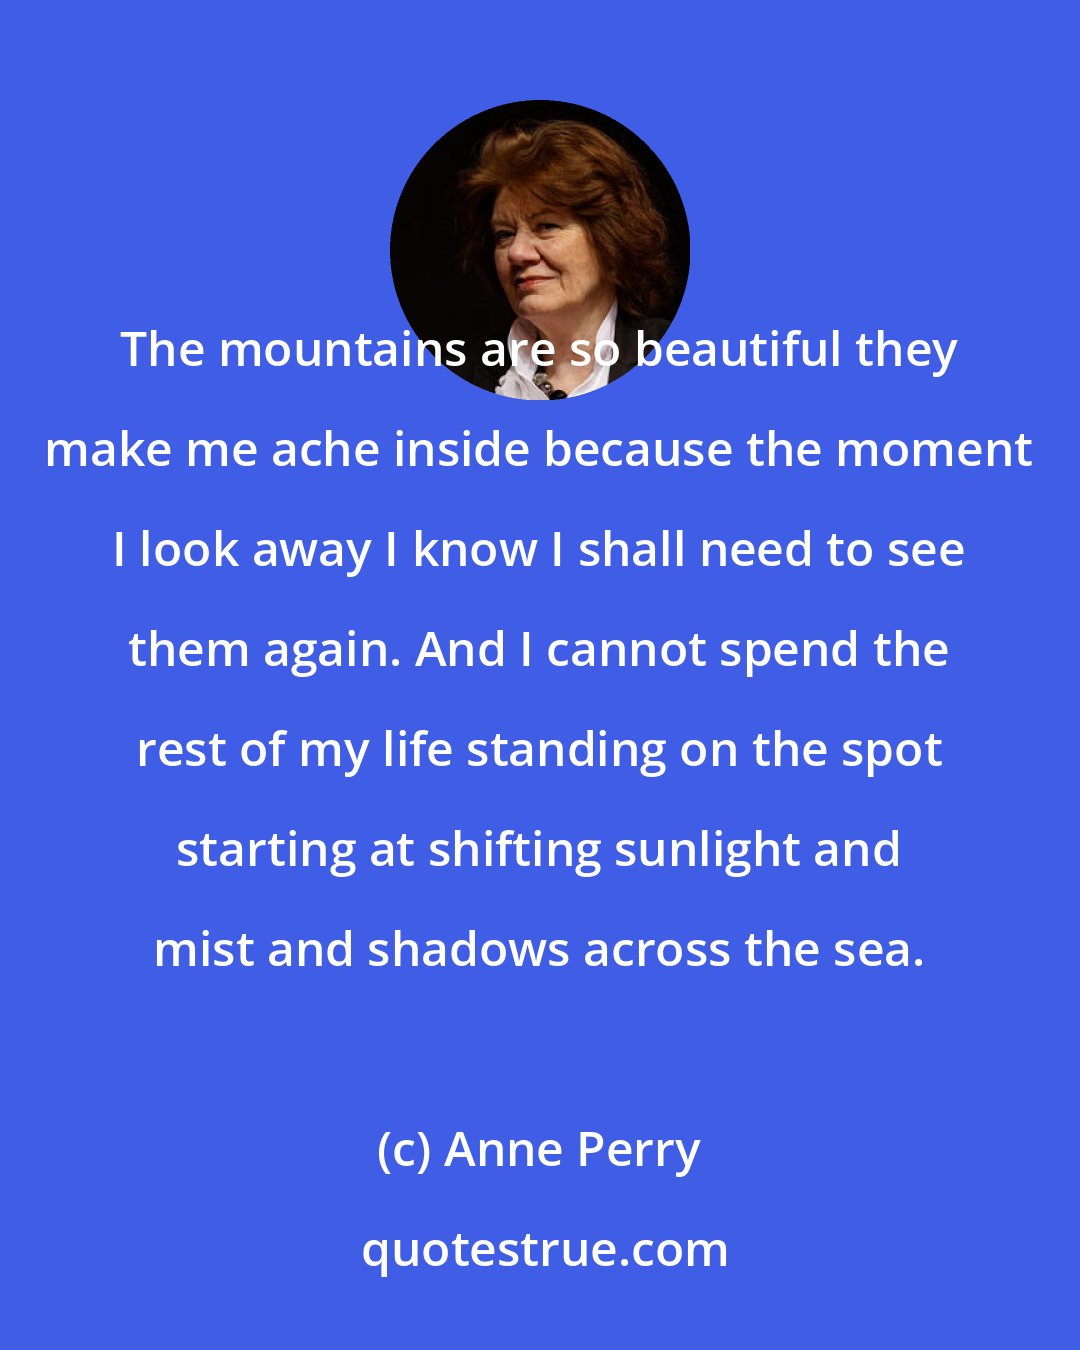 Anne Perry: The mountains are so beautiful they make me ache inside because the moment I look away I know I shall need to see them again. And I cannot spend the rest of my life standing on the spot starting at shifting sunlight and mist and shadows across the sea.